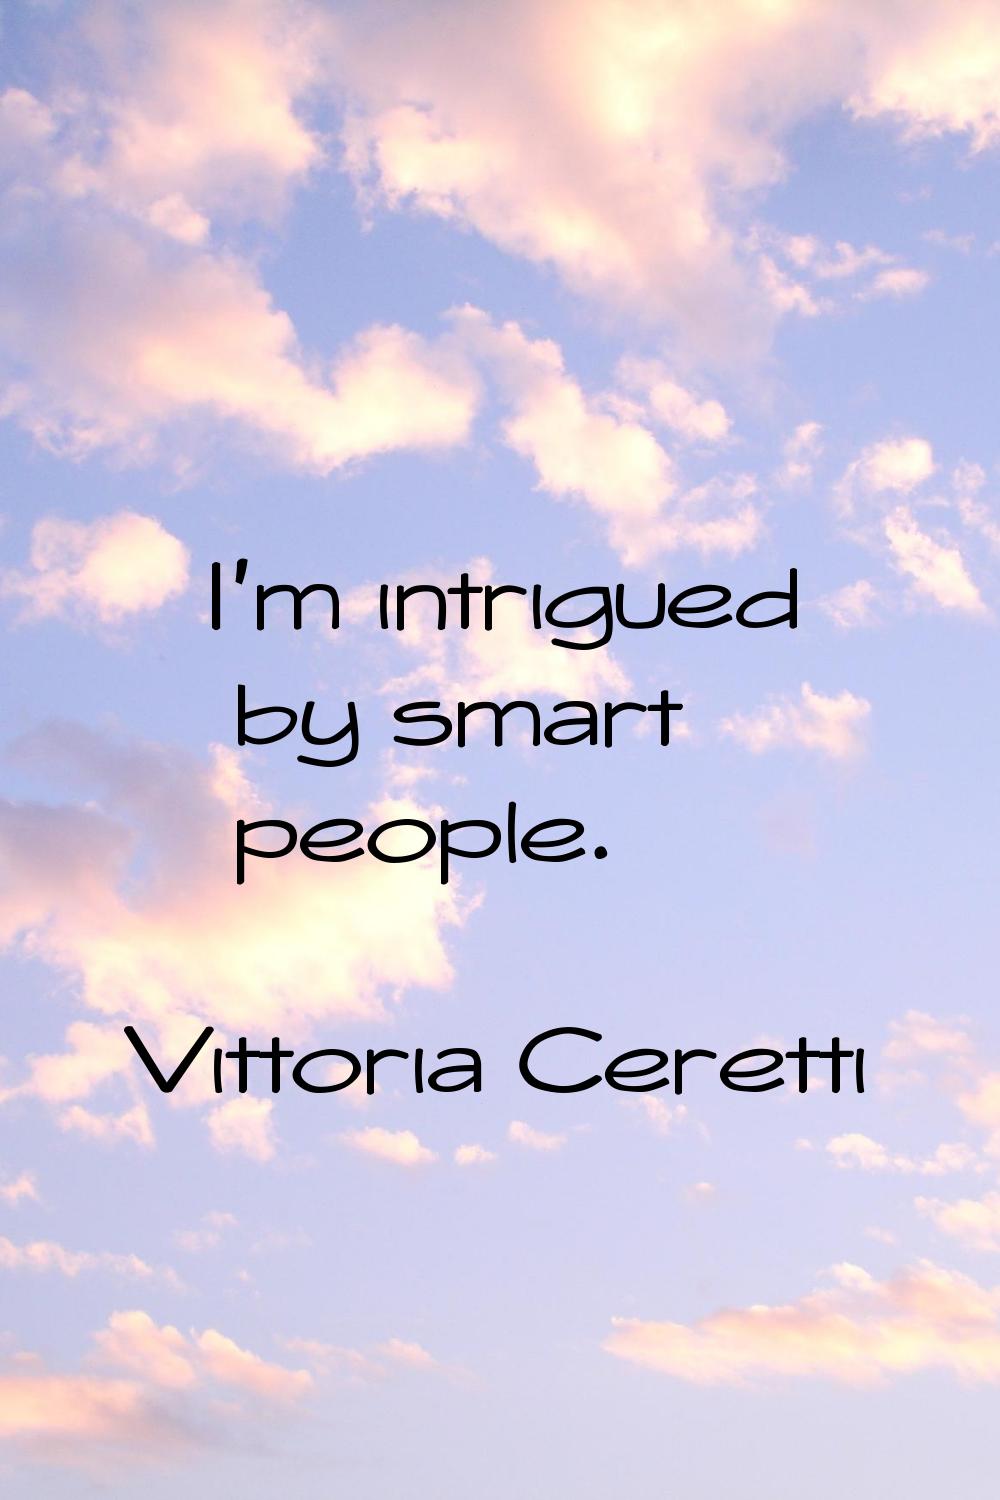 I'm intrigued by smart people.